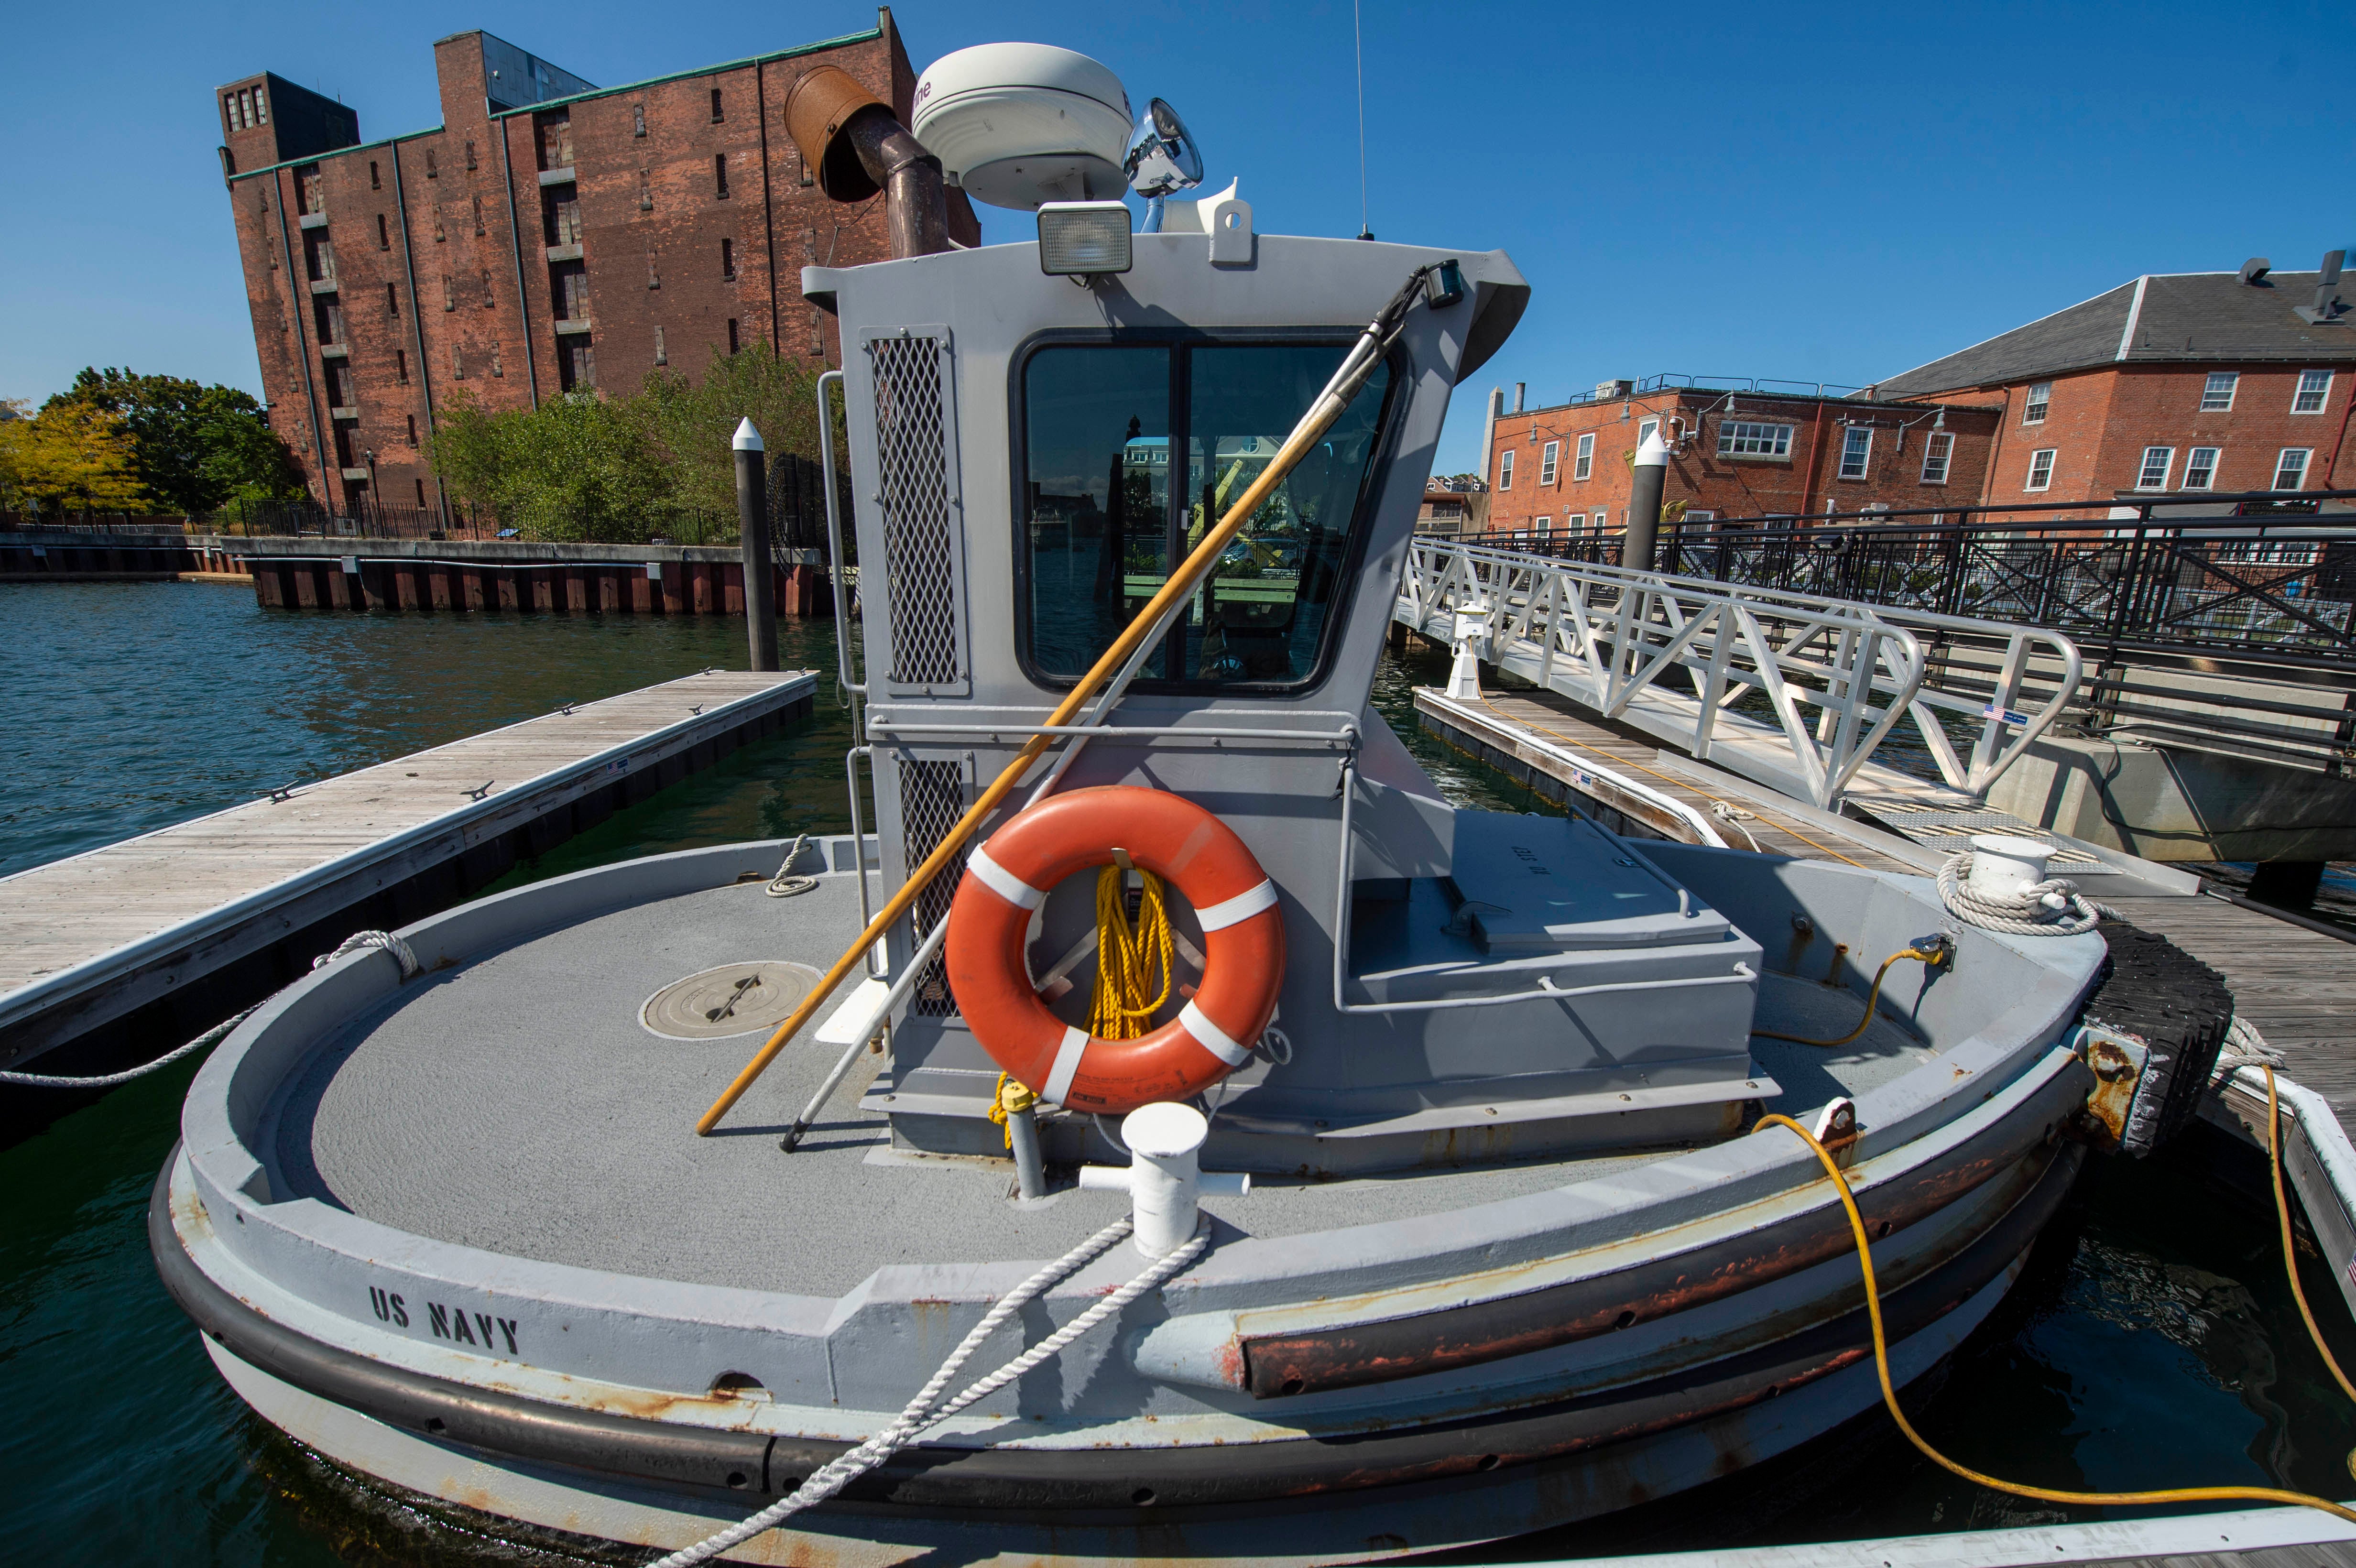 Meet the Navy’s most adorable boat: the Boomin’ Beaver